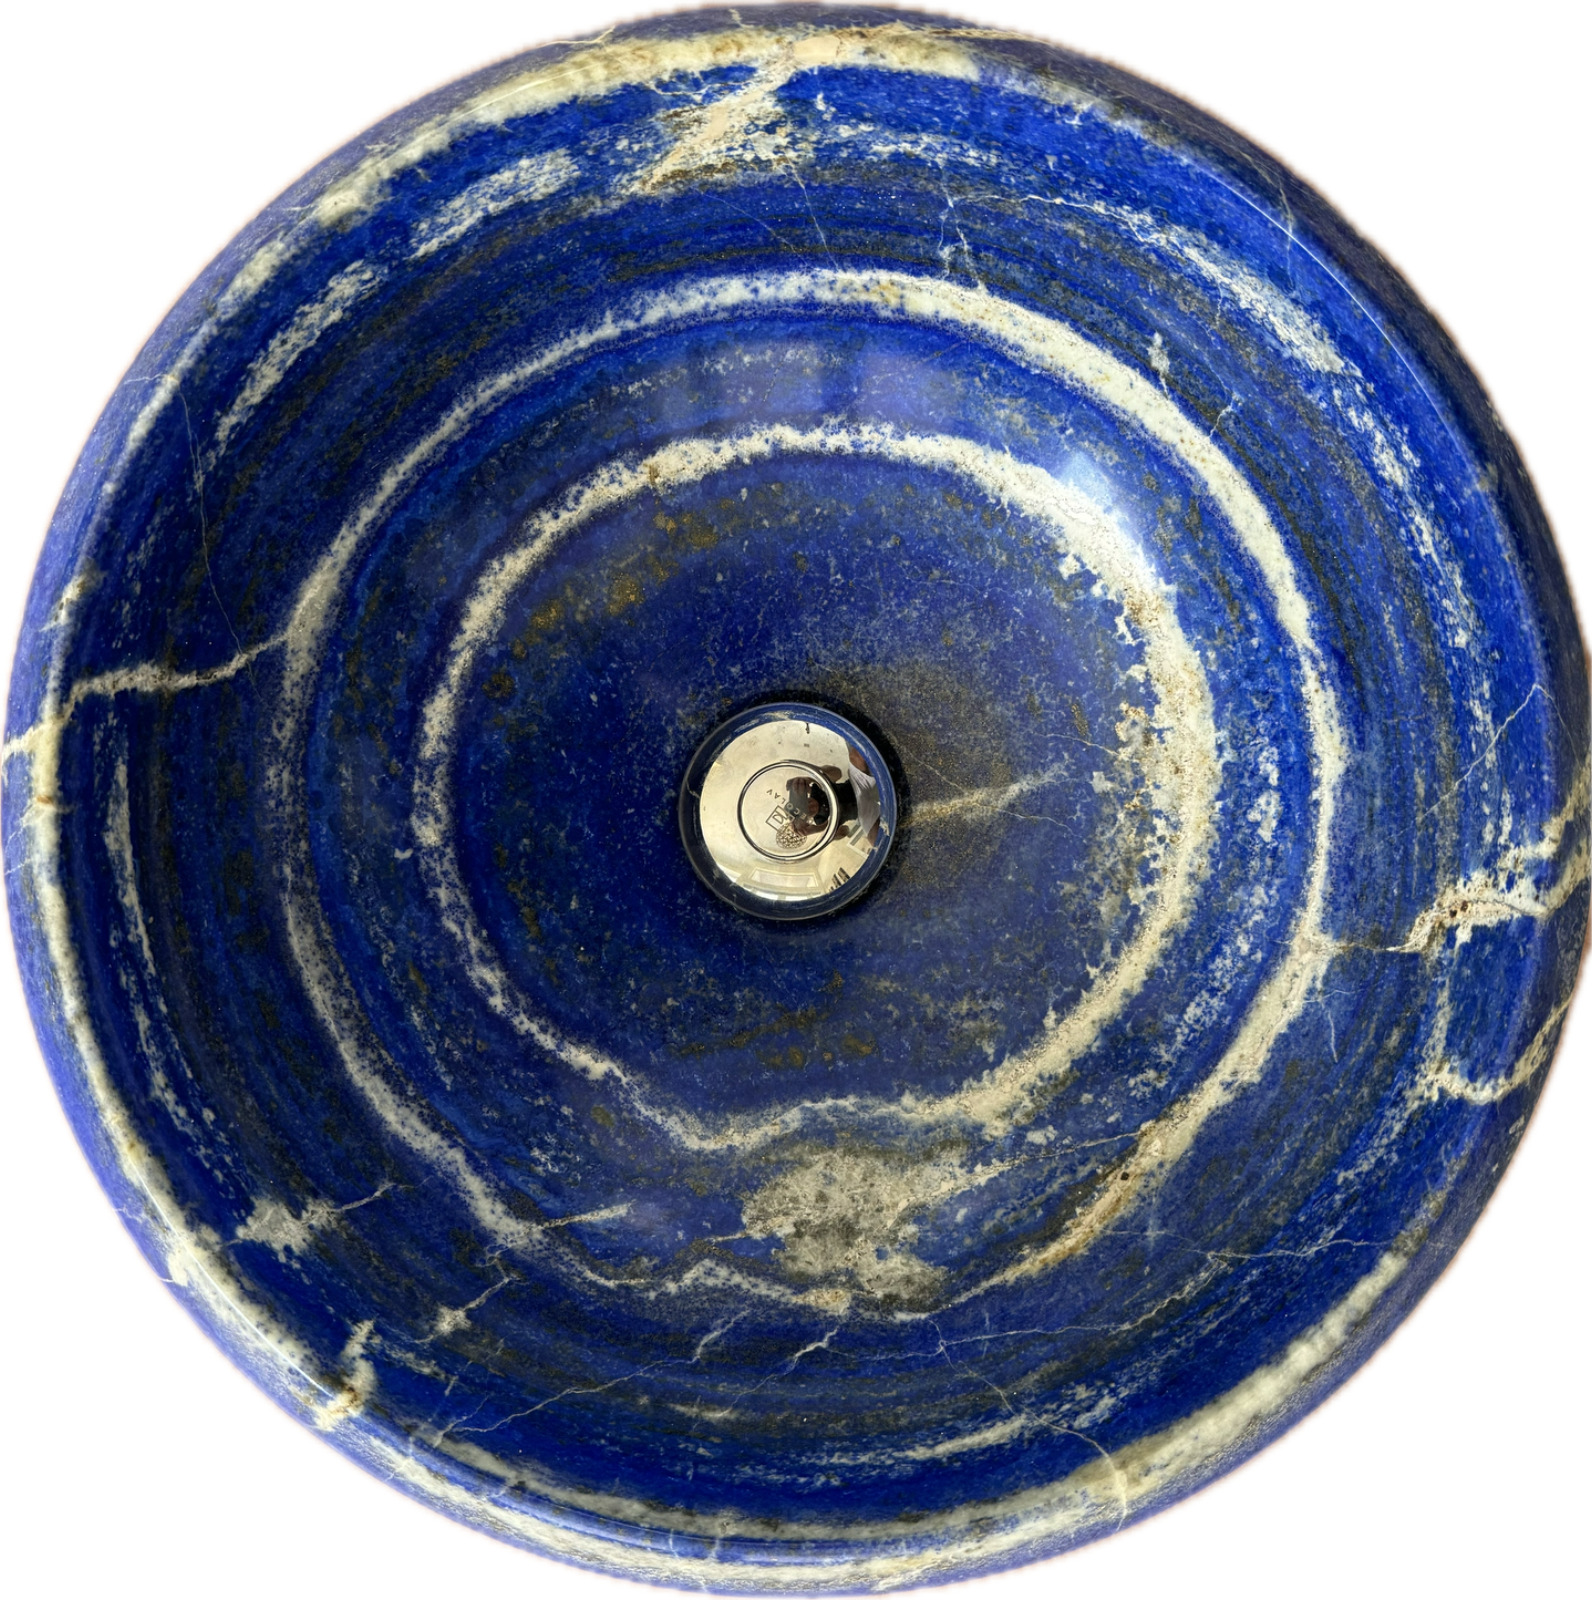 Lapis Lazuli vessel sink.  Only one known in existence